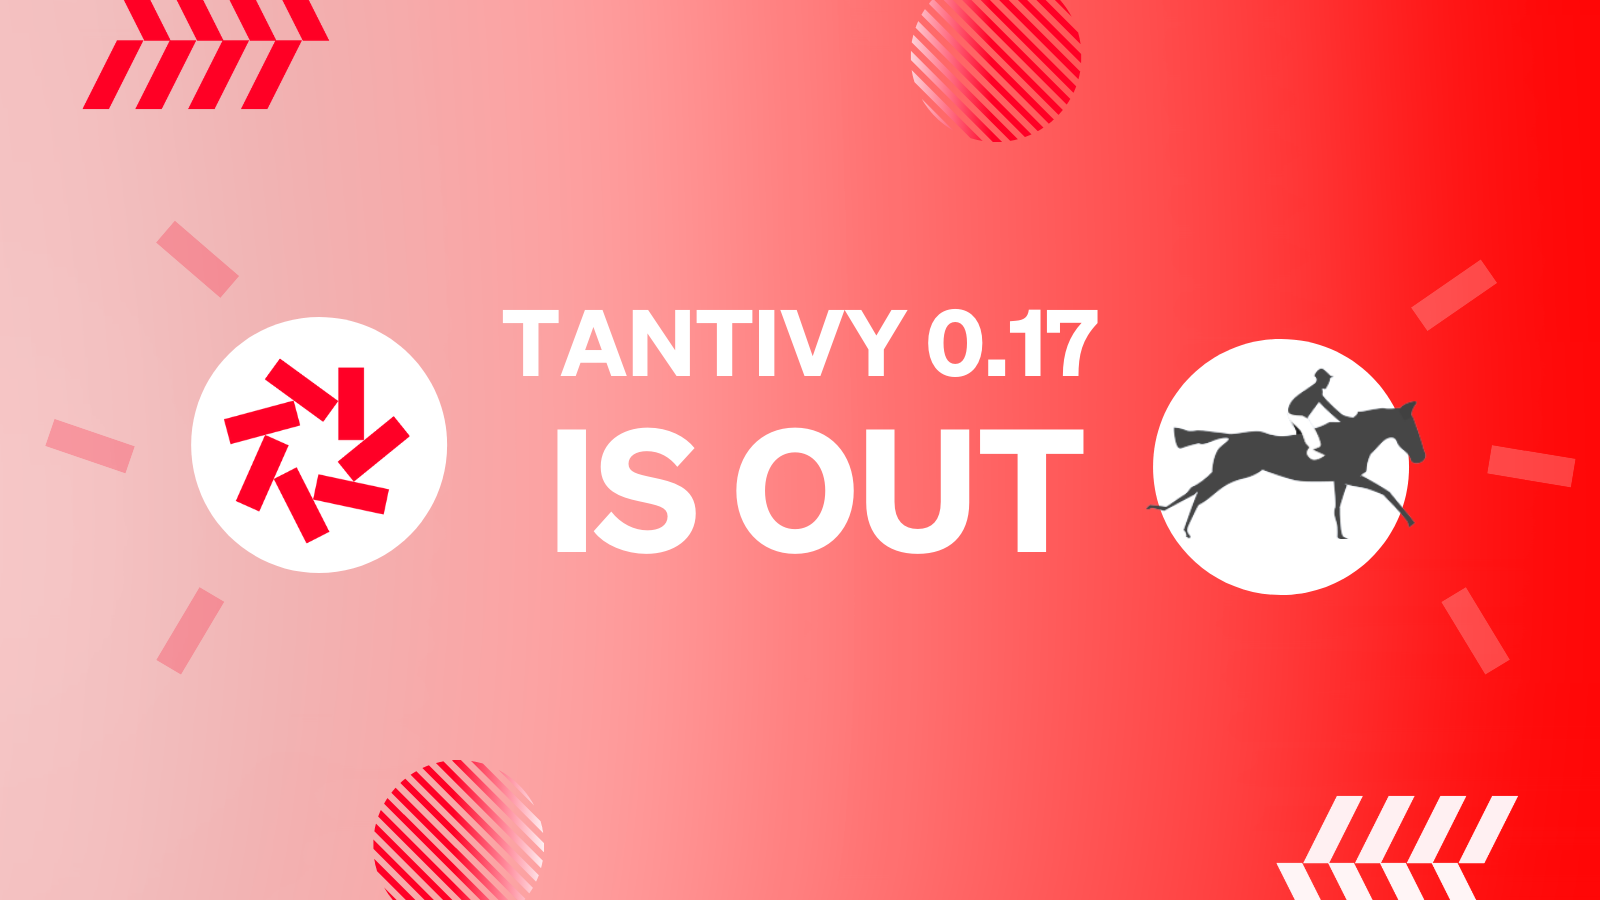 Tantivy 0.17 is out.